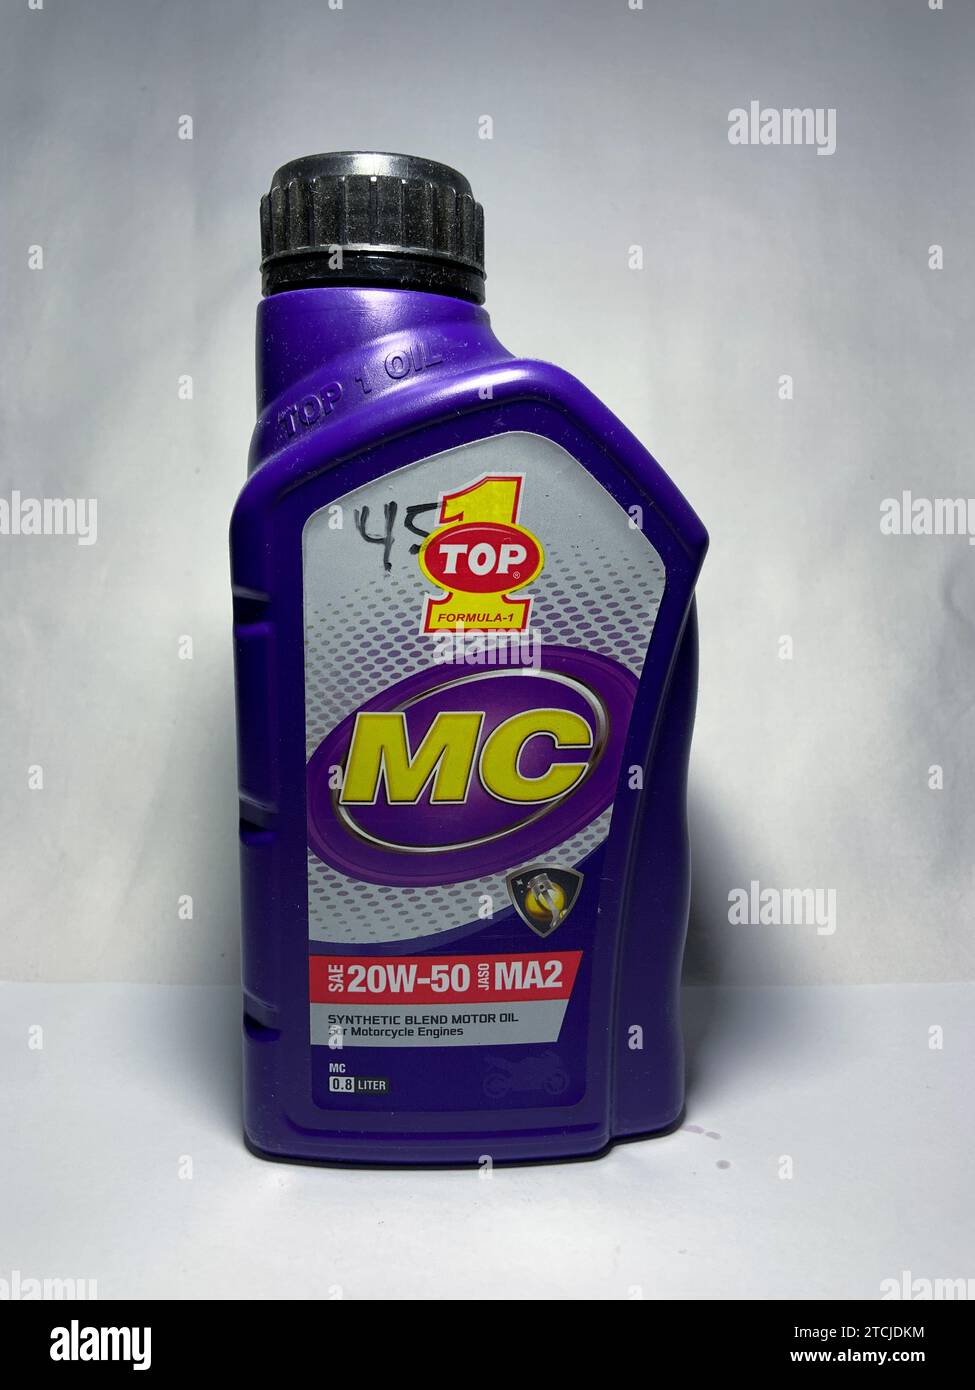 Surakarta, Indonesia - November 20, 2023 : Top one MC formula motor oil, SAE 20W-50 synthetic blend moto oil for motorcycle engines 800ml. Plastic bot Stock Photo